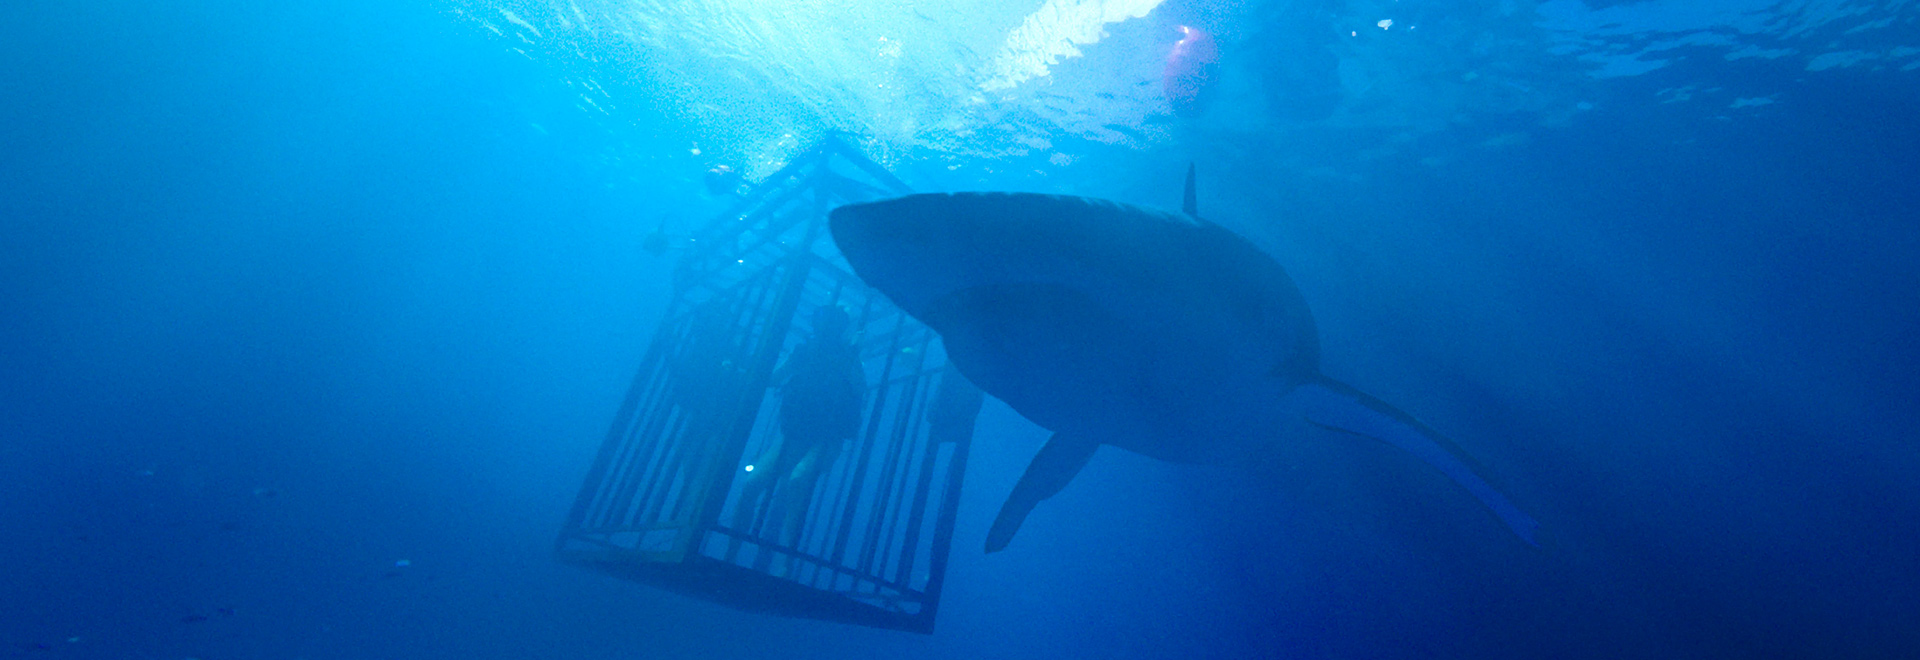 47 Metres Down - Escape from shark-infested waters